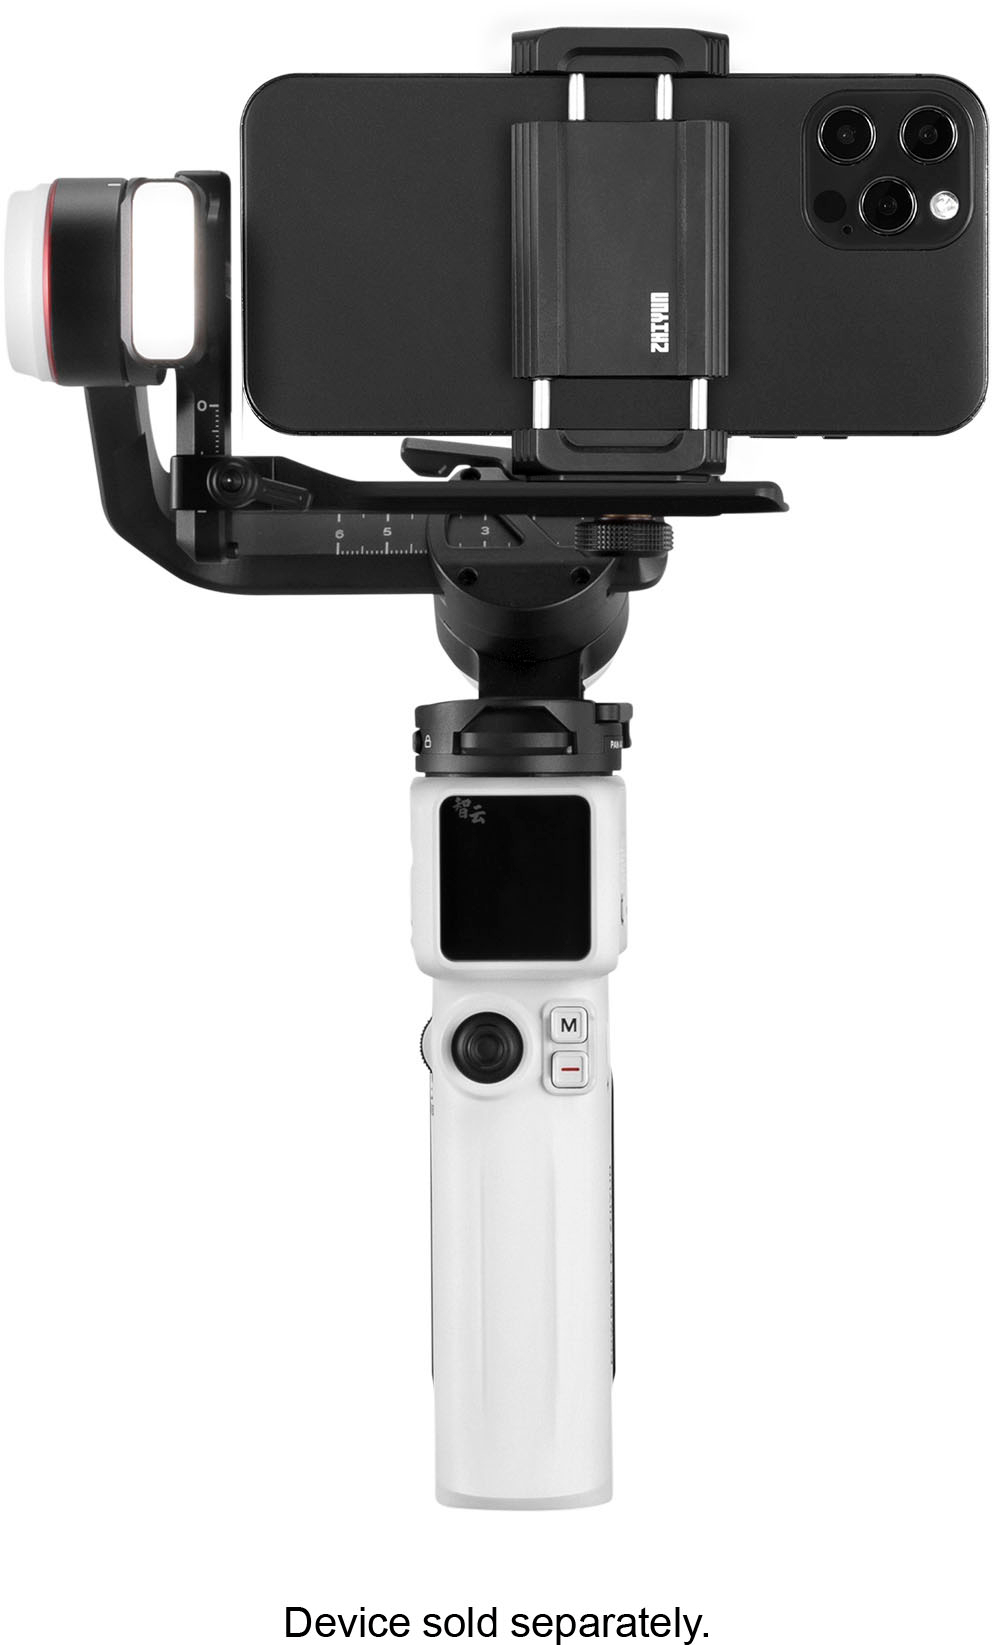 Left View: Zhiyun - Crane-M 3S 3-Axis Gimbal Stabilizer for Smartphones, Action, or Mirrorless Cameras with Detachable Tri-pod Stand - White